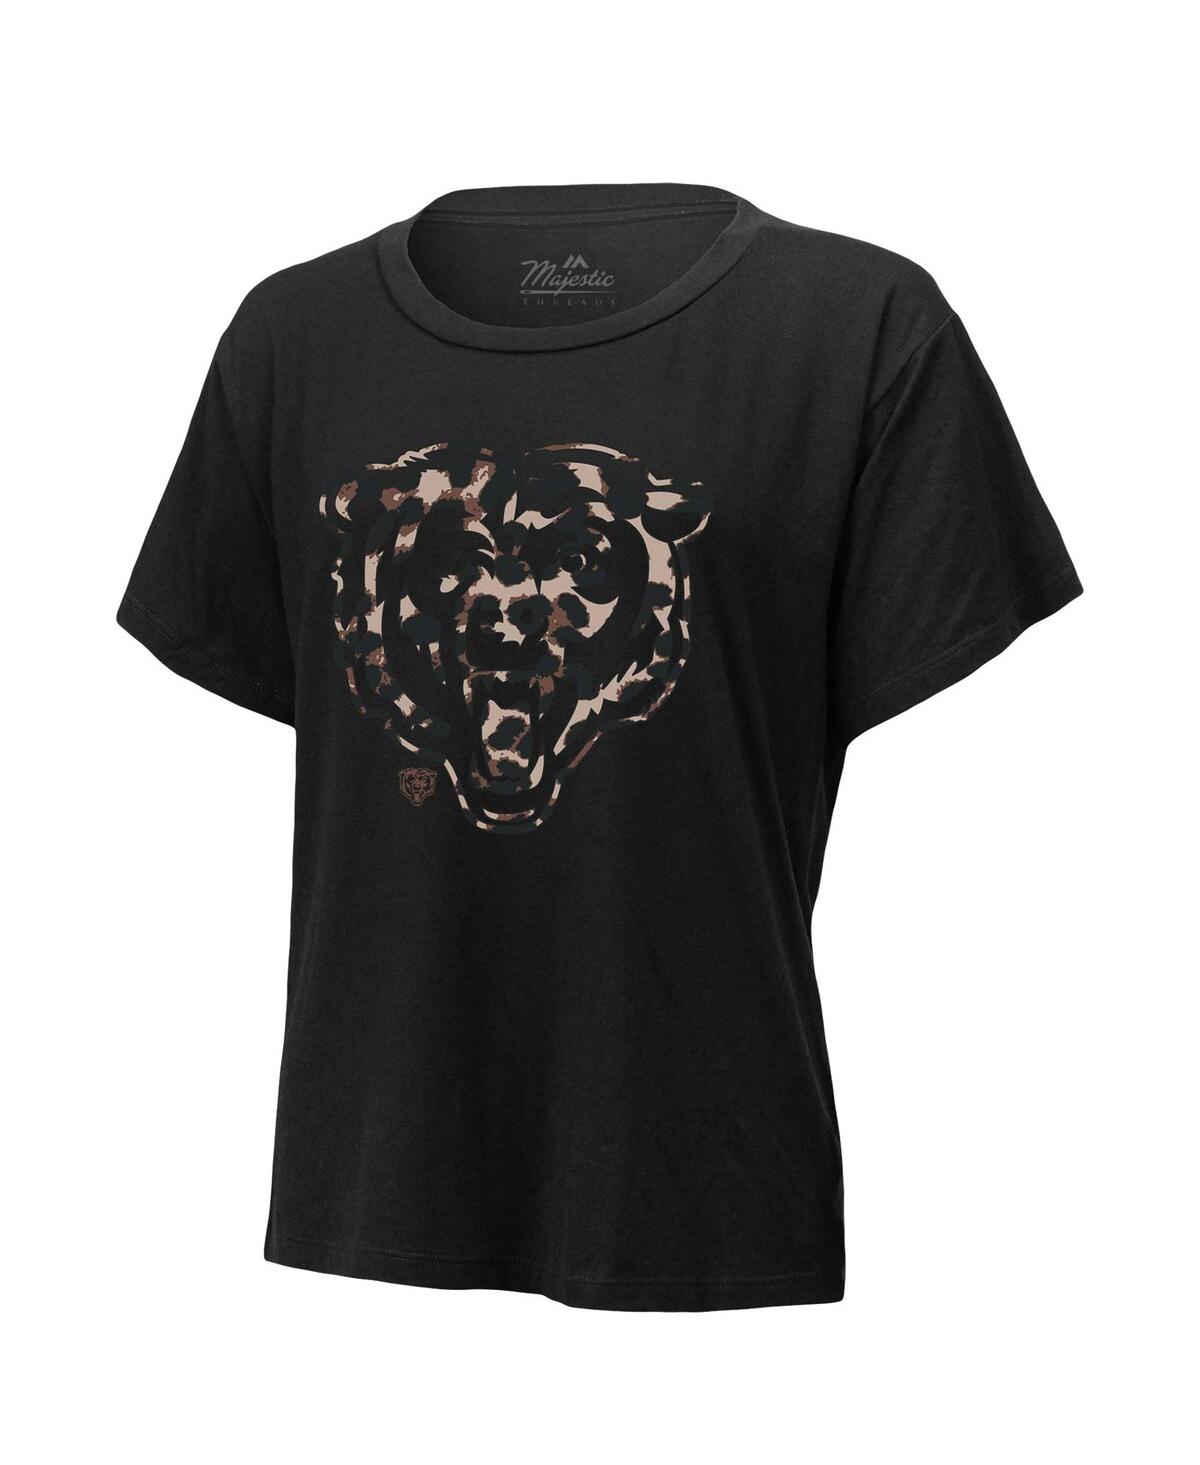 Shop Majestic Women's  Threads Justin Fields Black Chicago Bears Leopard Player Name And Number T-shirt